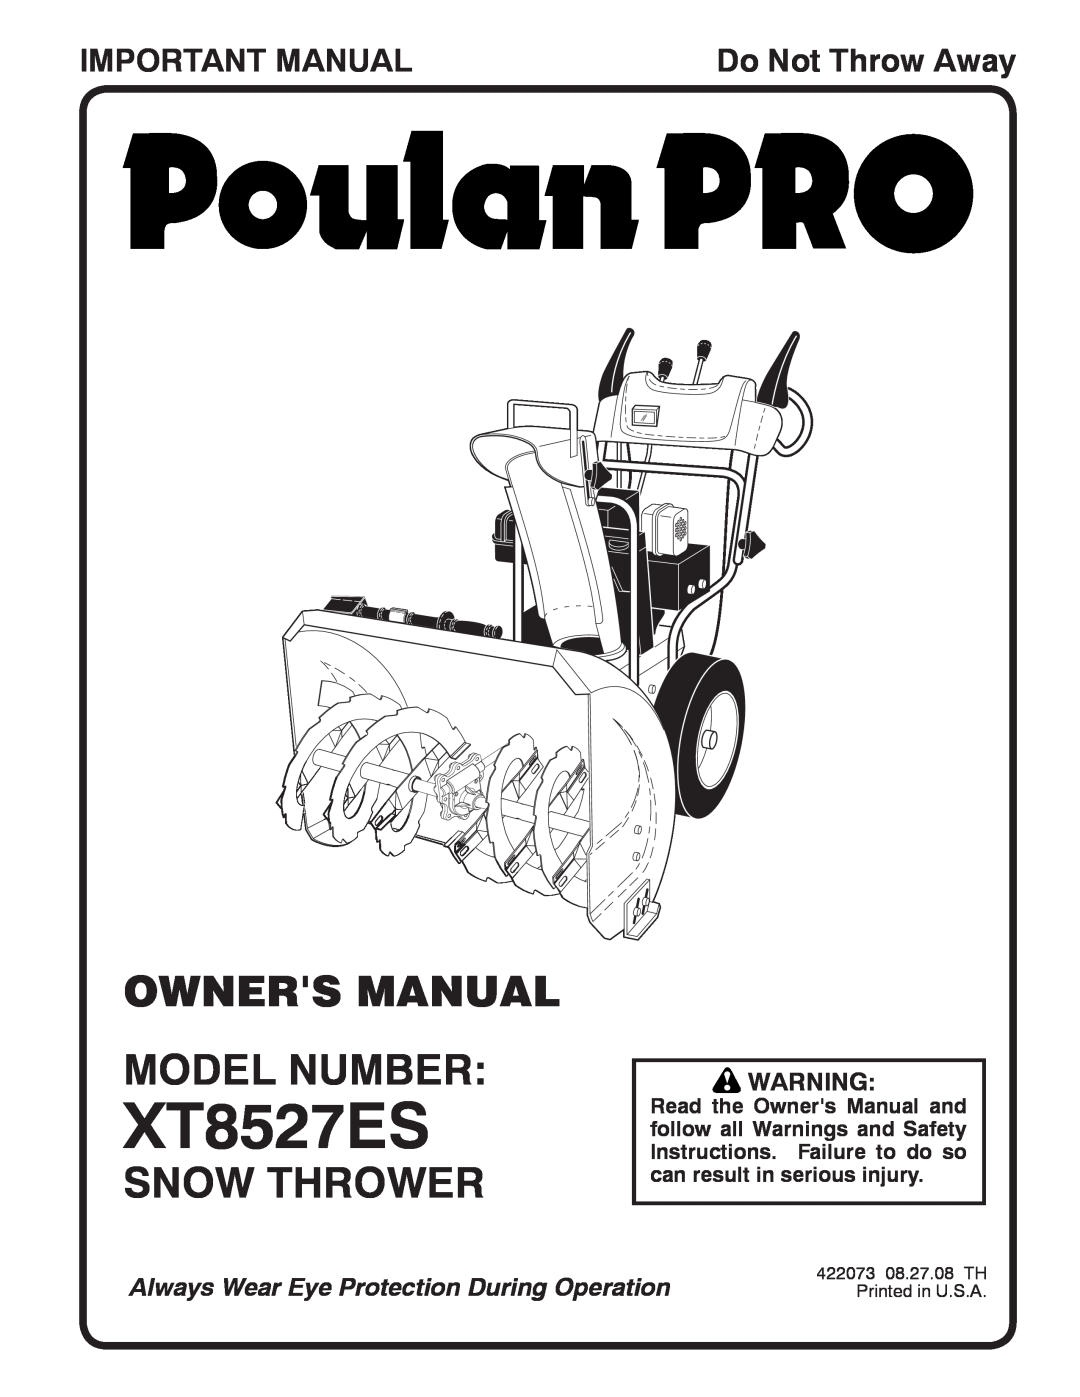 Poulan 422073 owner manual Owners Manual Model Number, Snow Thrower, Important Manual, XT8527ES, Do Not Throw Away 